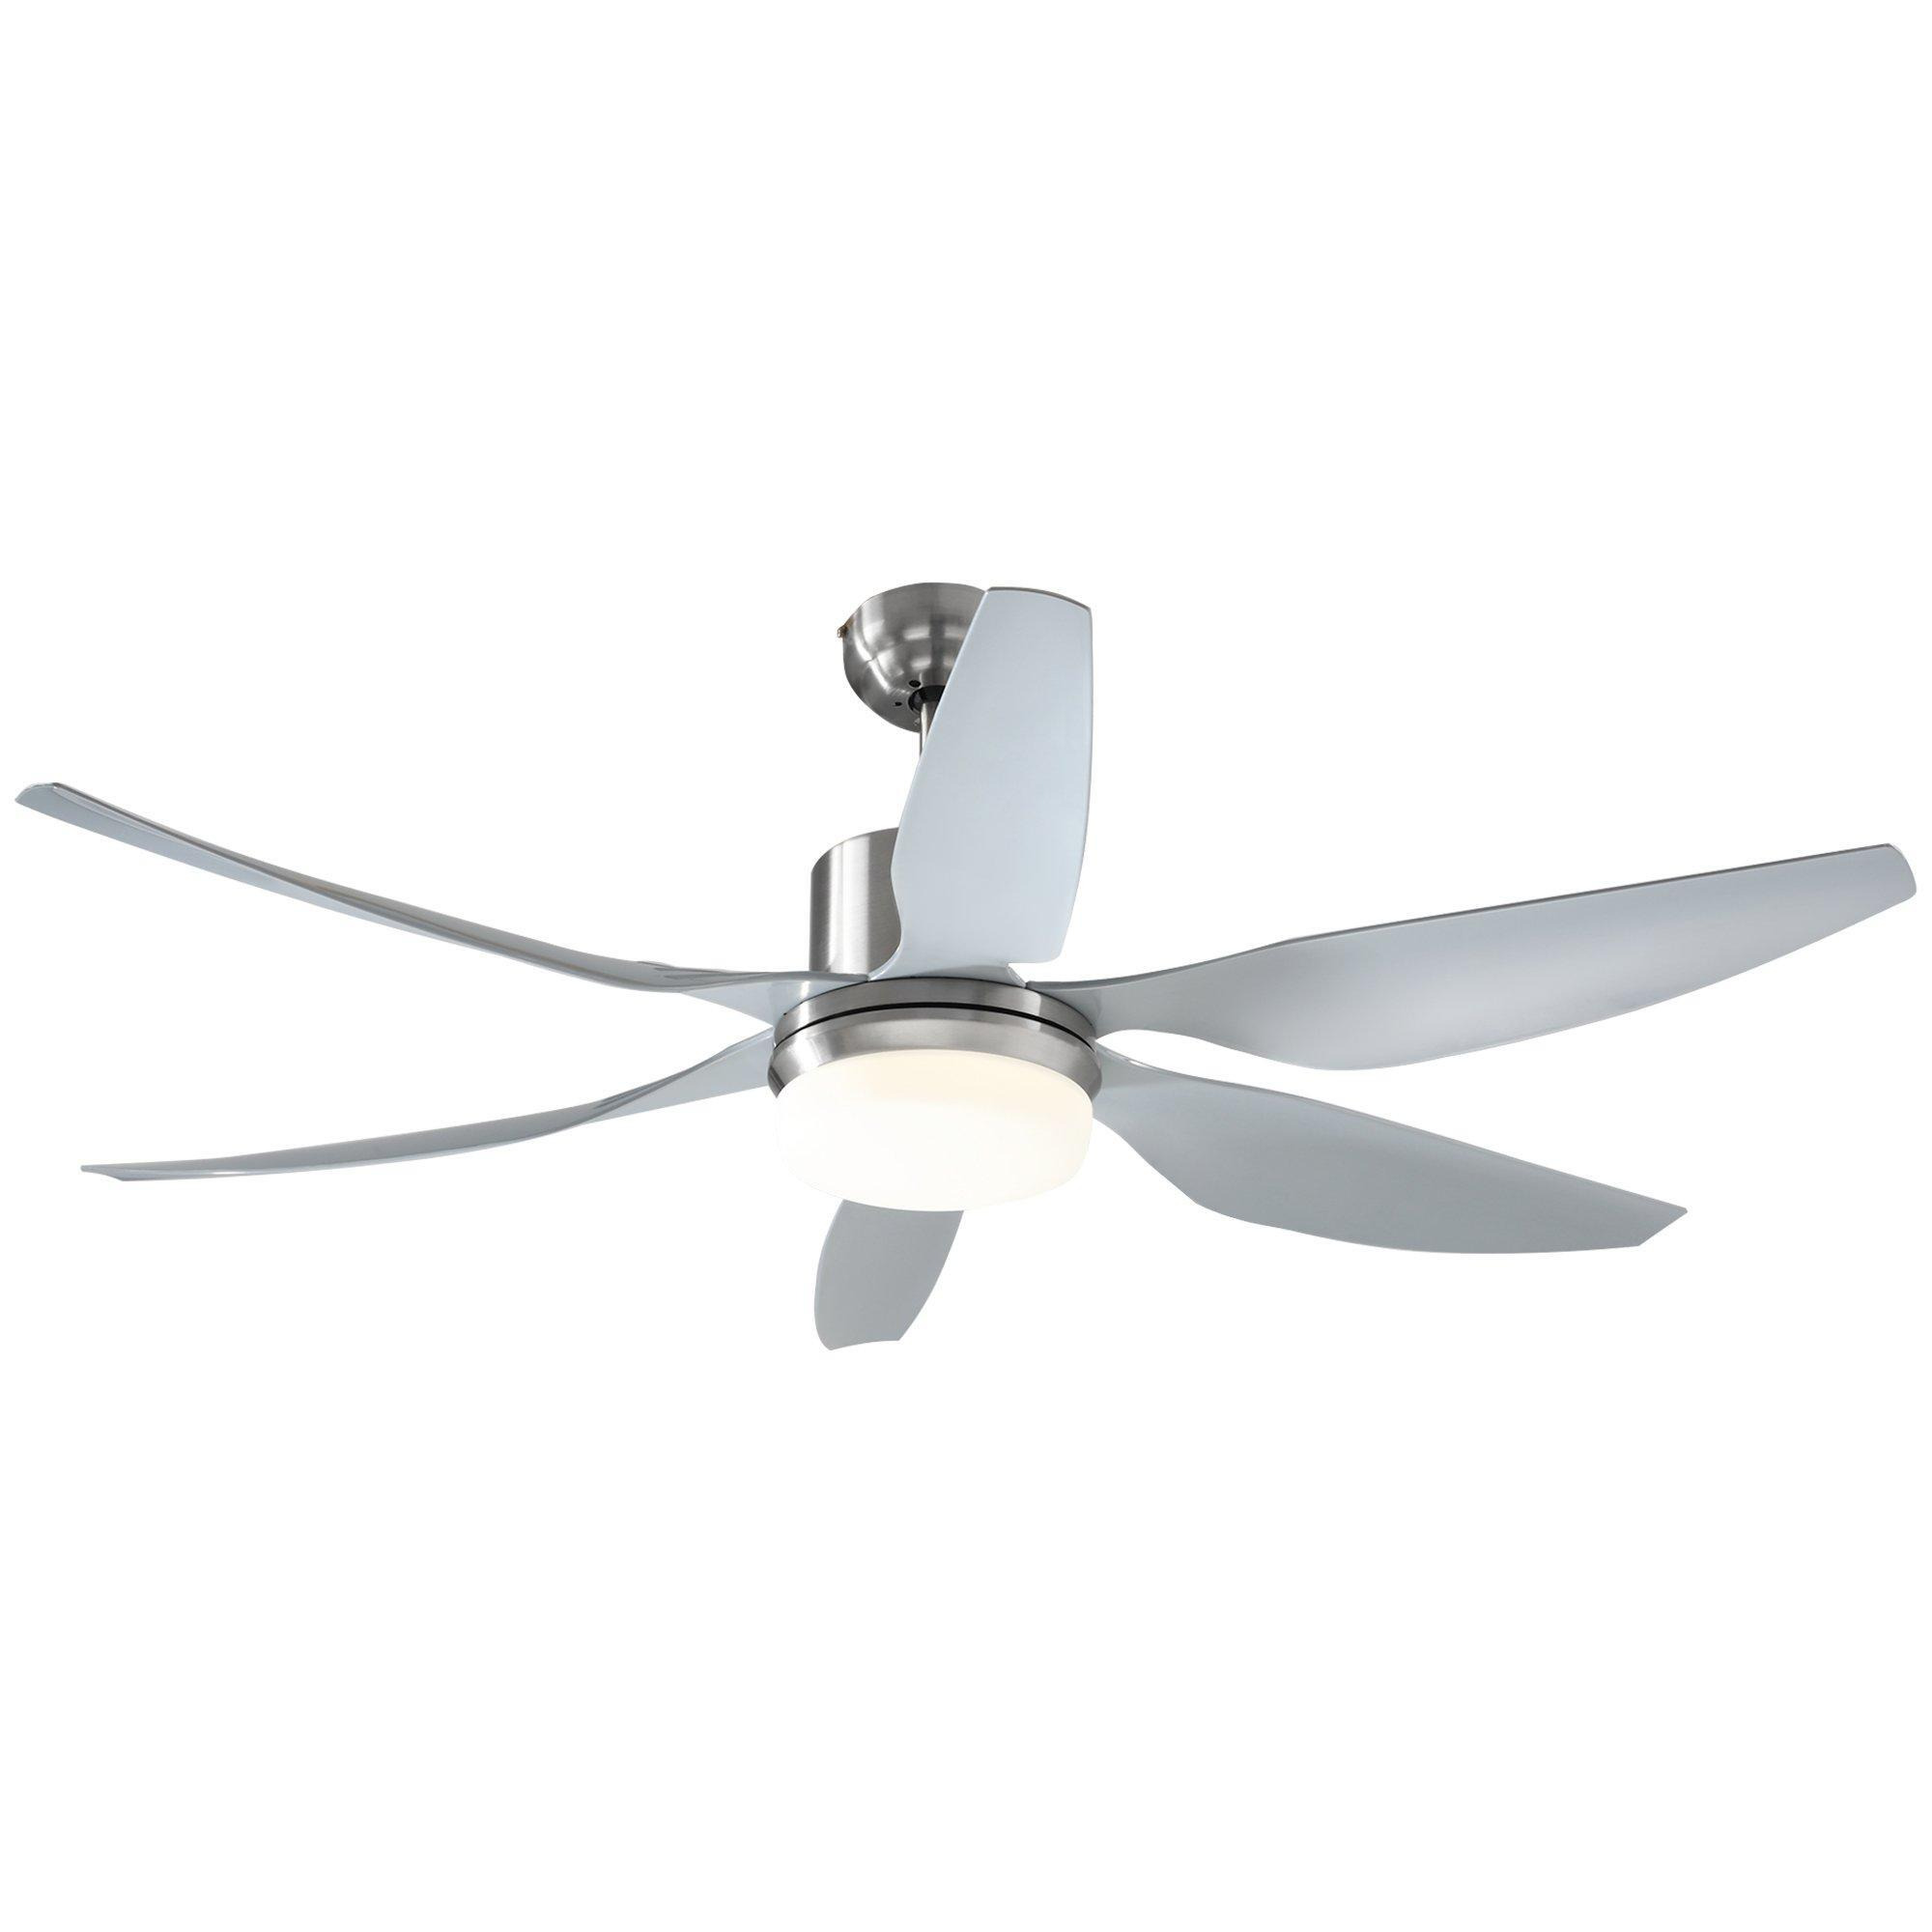 Reversible Ceiling Fan with Light 6 Blades Indoor LED Lighting Fan - image 1